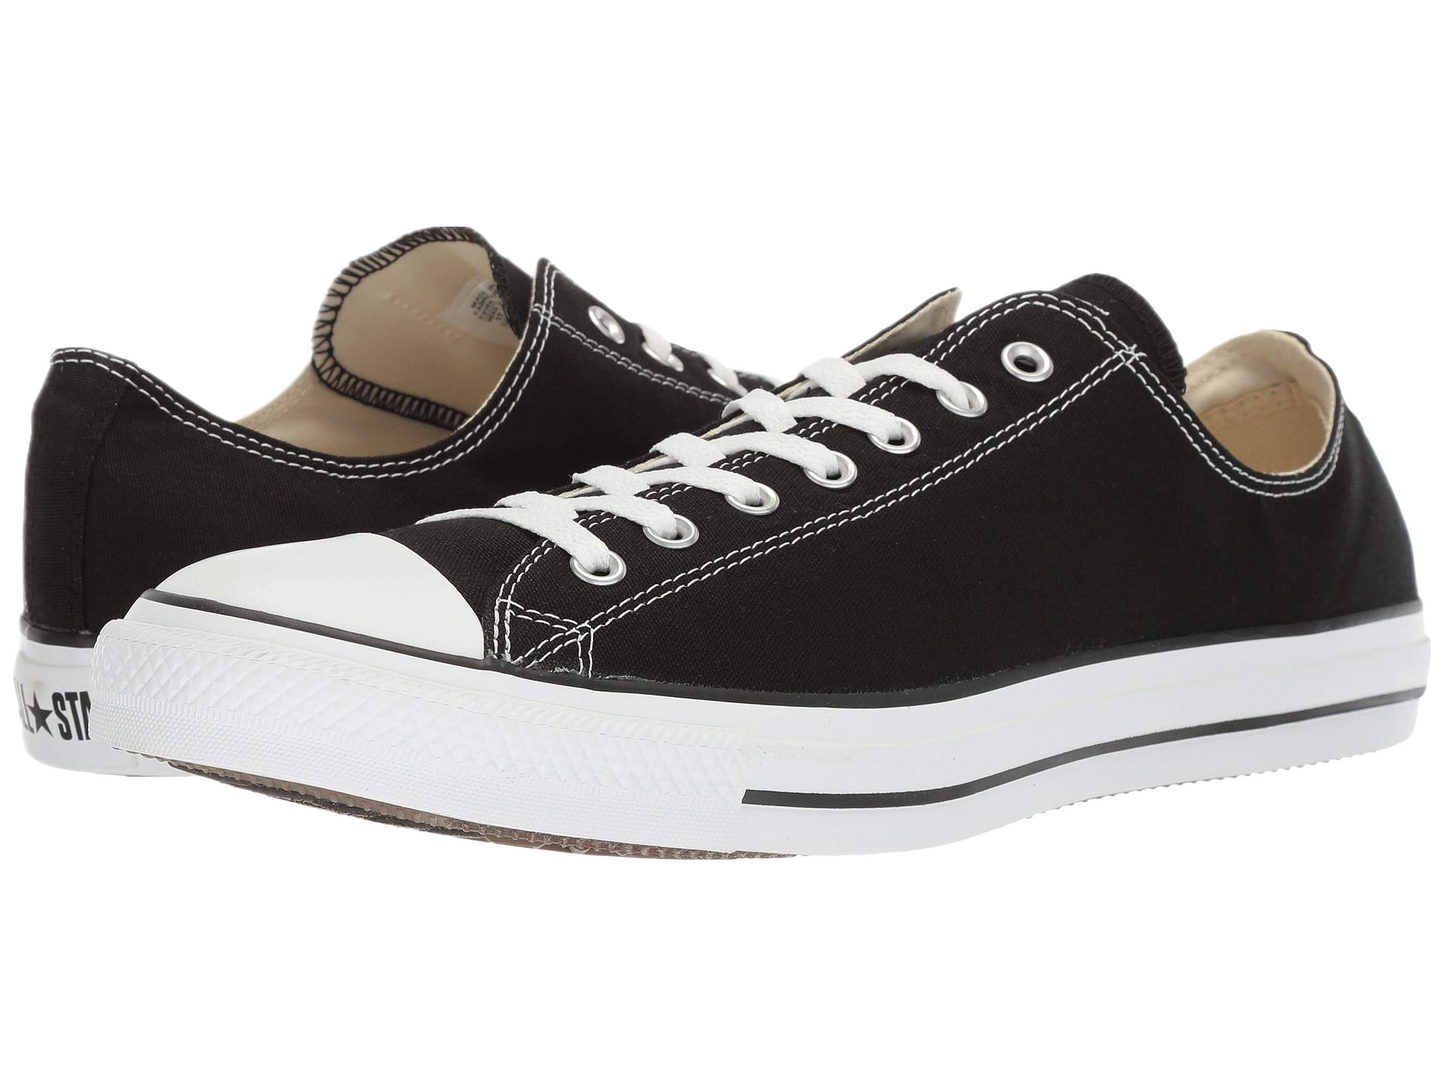 Converse Adult Chuck Taylor All Star Classic Low Top Black M9166 / M9166C